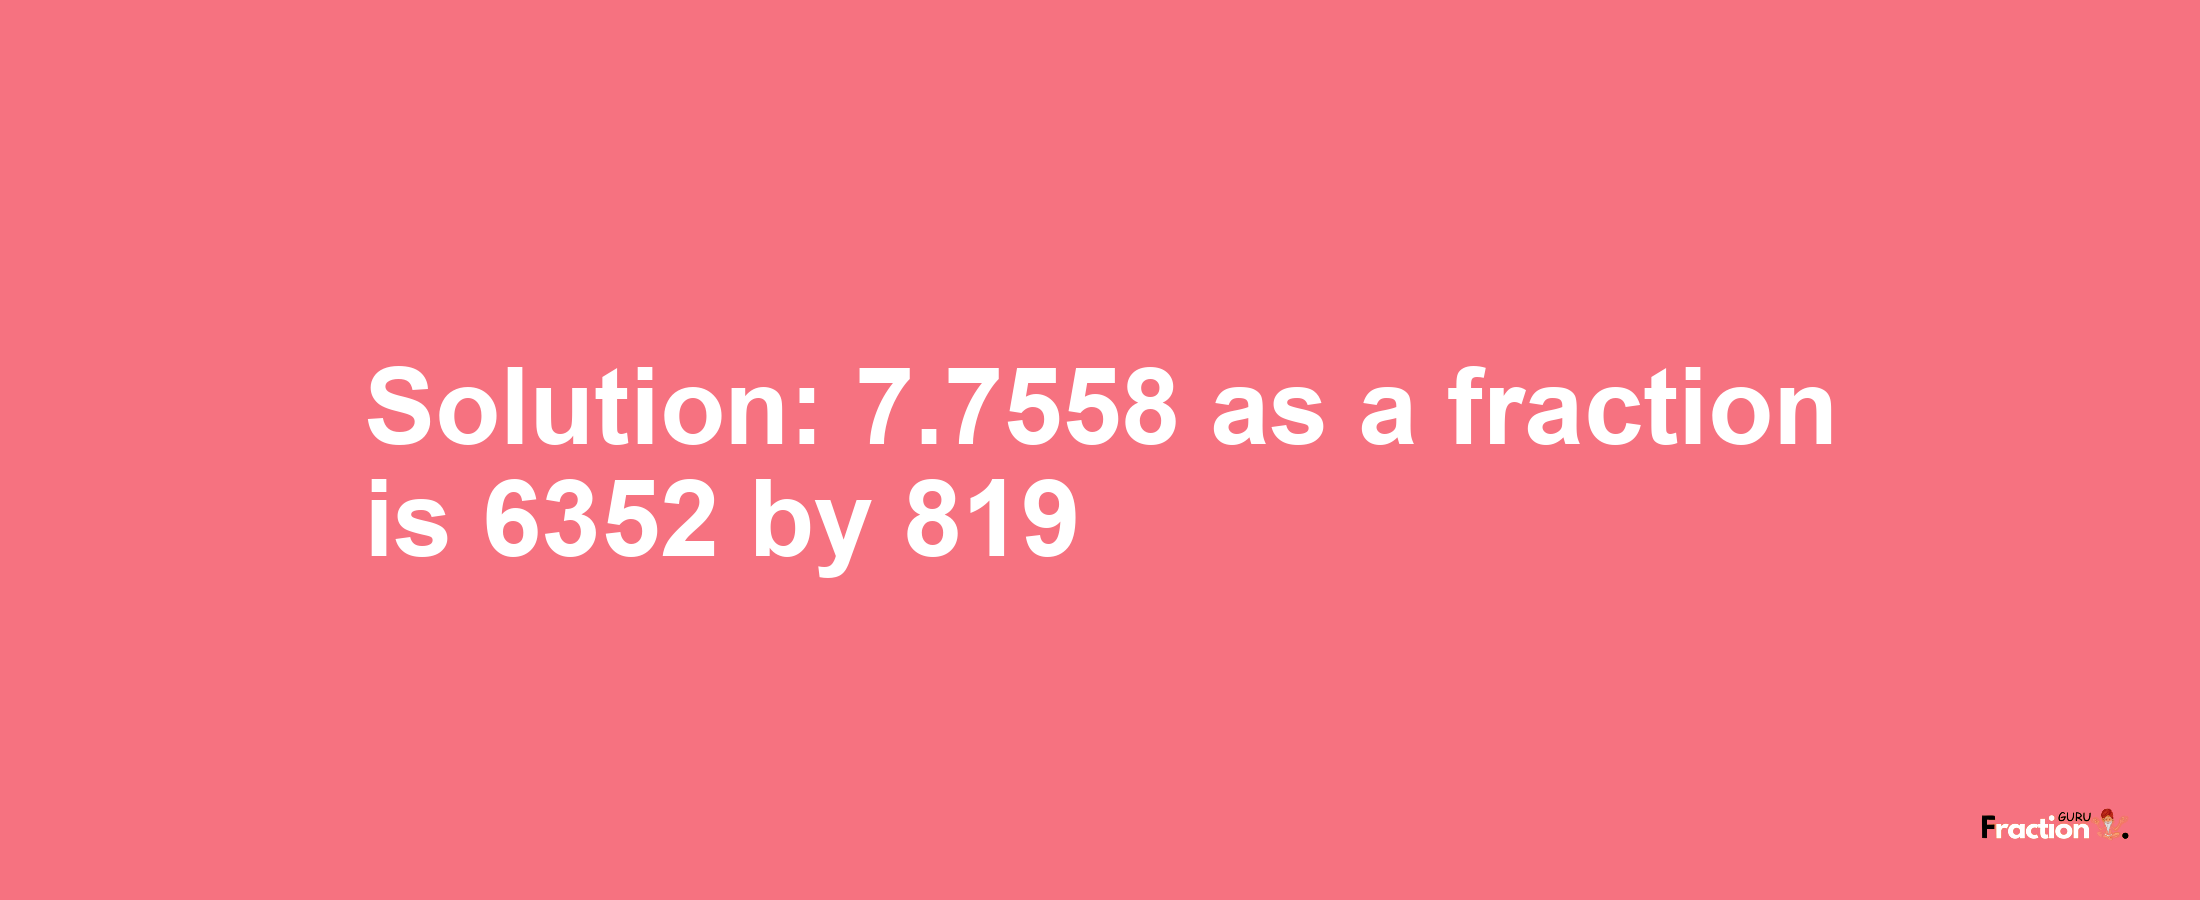 Solution:7.7558 as a fraction is 6352/819